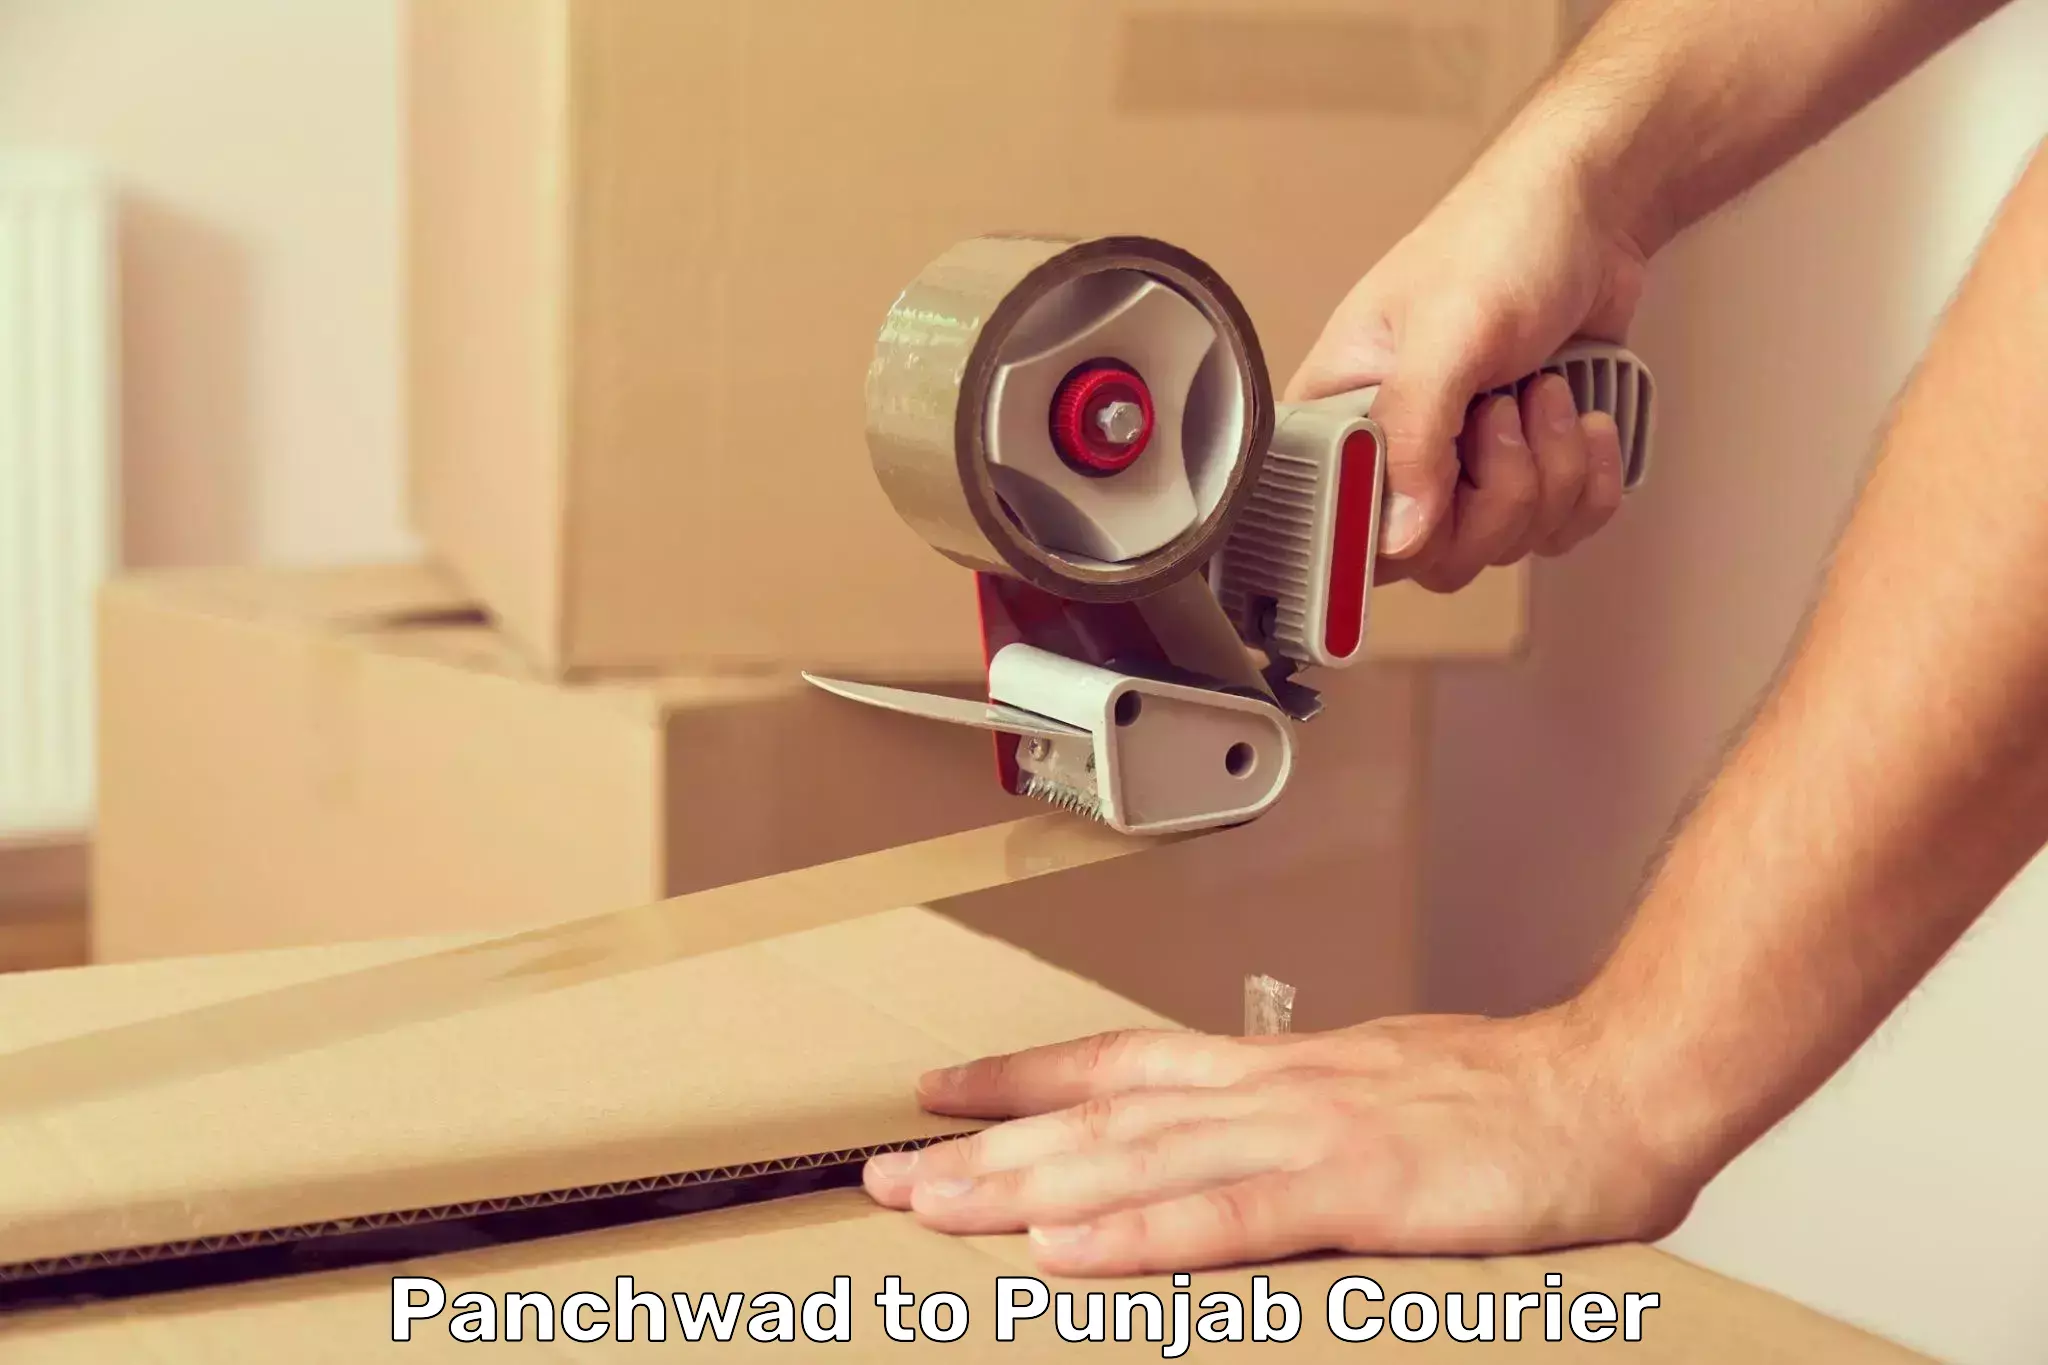 Cost-effective courier options Panchwad to Central University of Punjab Bathinda